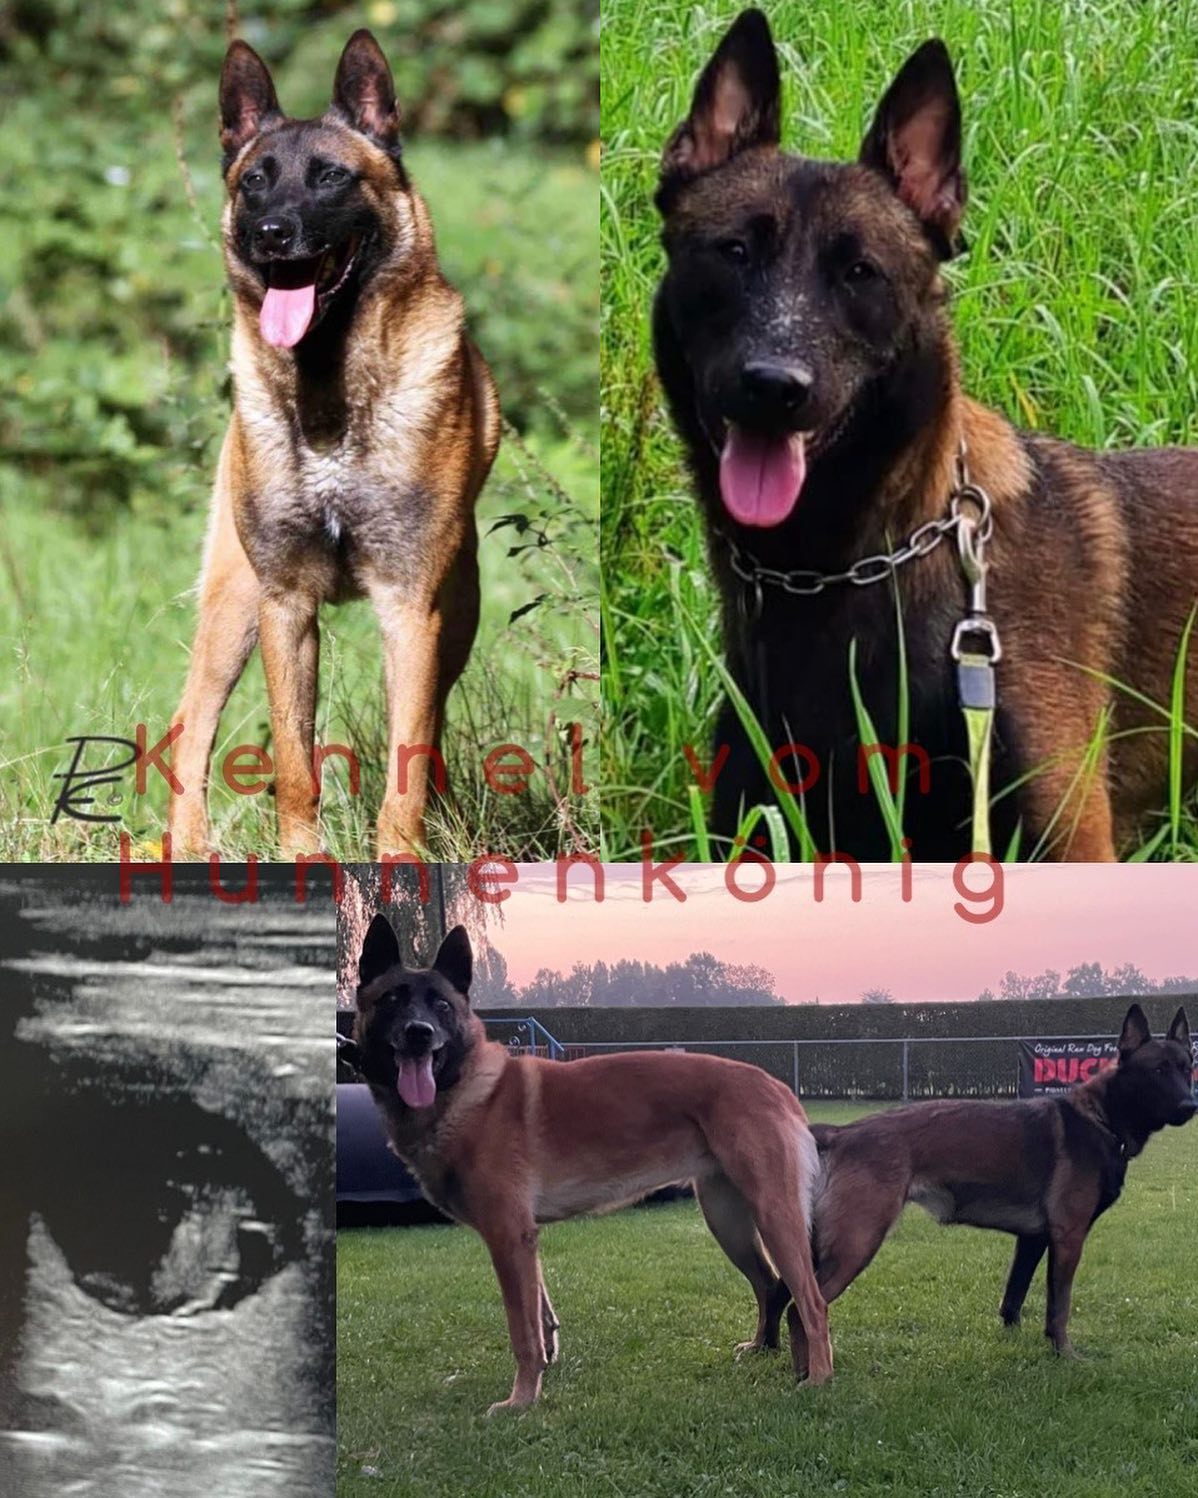 CORRALET LOLLY is succsessfully mated ‼️ YES #ecxited 💥

CORRALET LOLLY is pregnant by Ramsack van Rockpinsch @ramsackvanrockpinsch 💪🏽 We are expecting high driving, robust Malinois puppies in early November! 

For questions and reservations please send an email or message.

#malinois #malinoispuppy #malinoisofinstagram #workingmalinois #workingdogs #puppiesofinstagram #malinoislovers #malinoisworld #vomhunnenkönig #atillayueksel